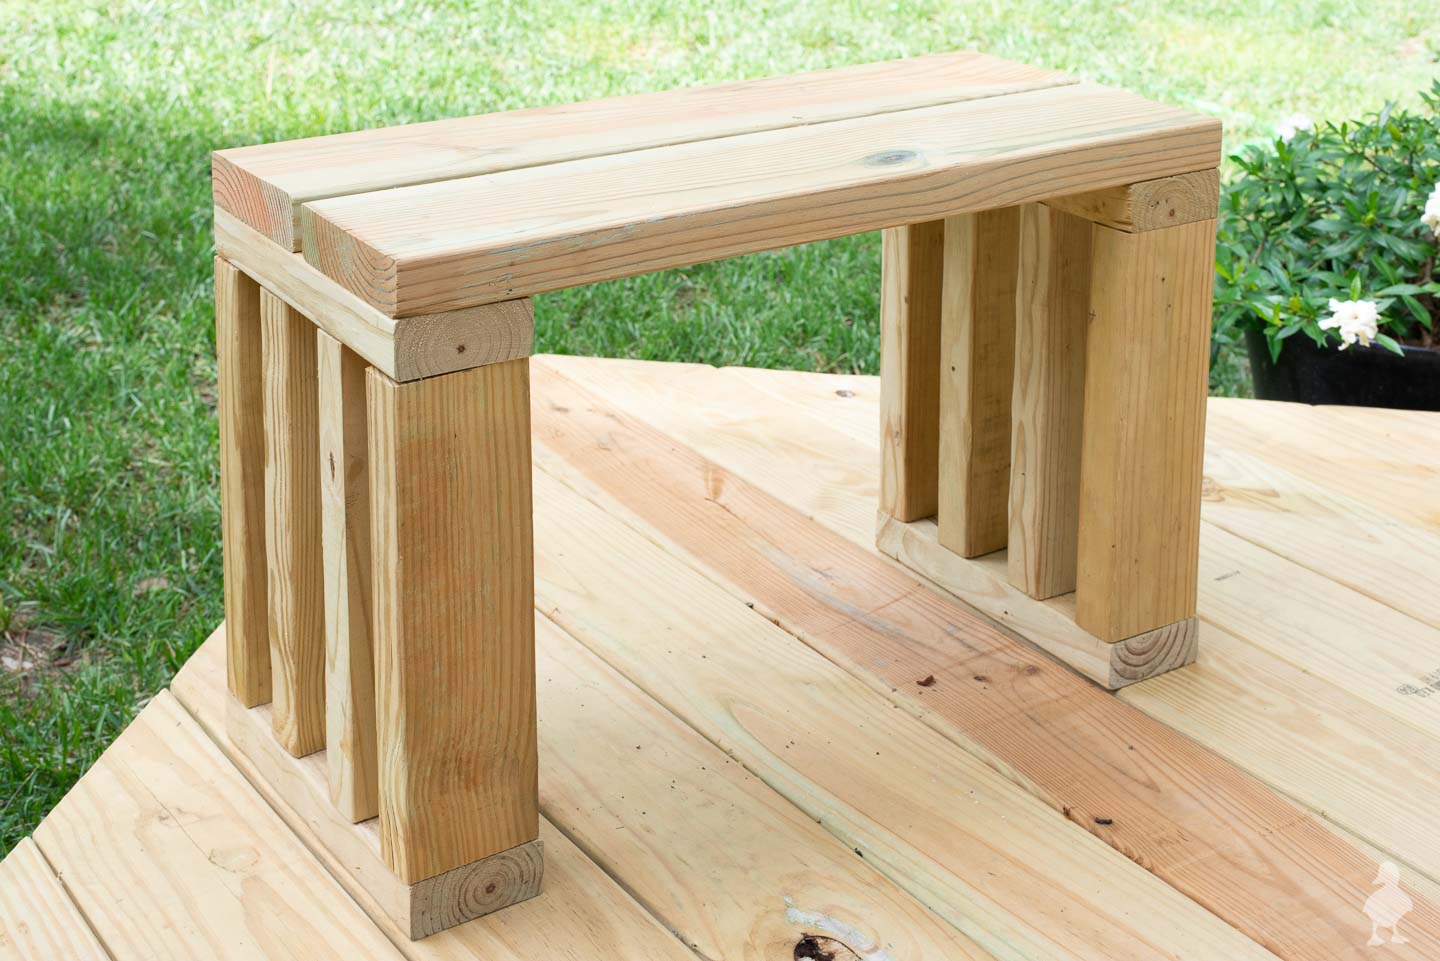 Simple Woodworking Project // Easy Bench Ideas You Can Build Today